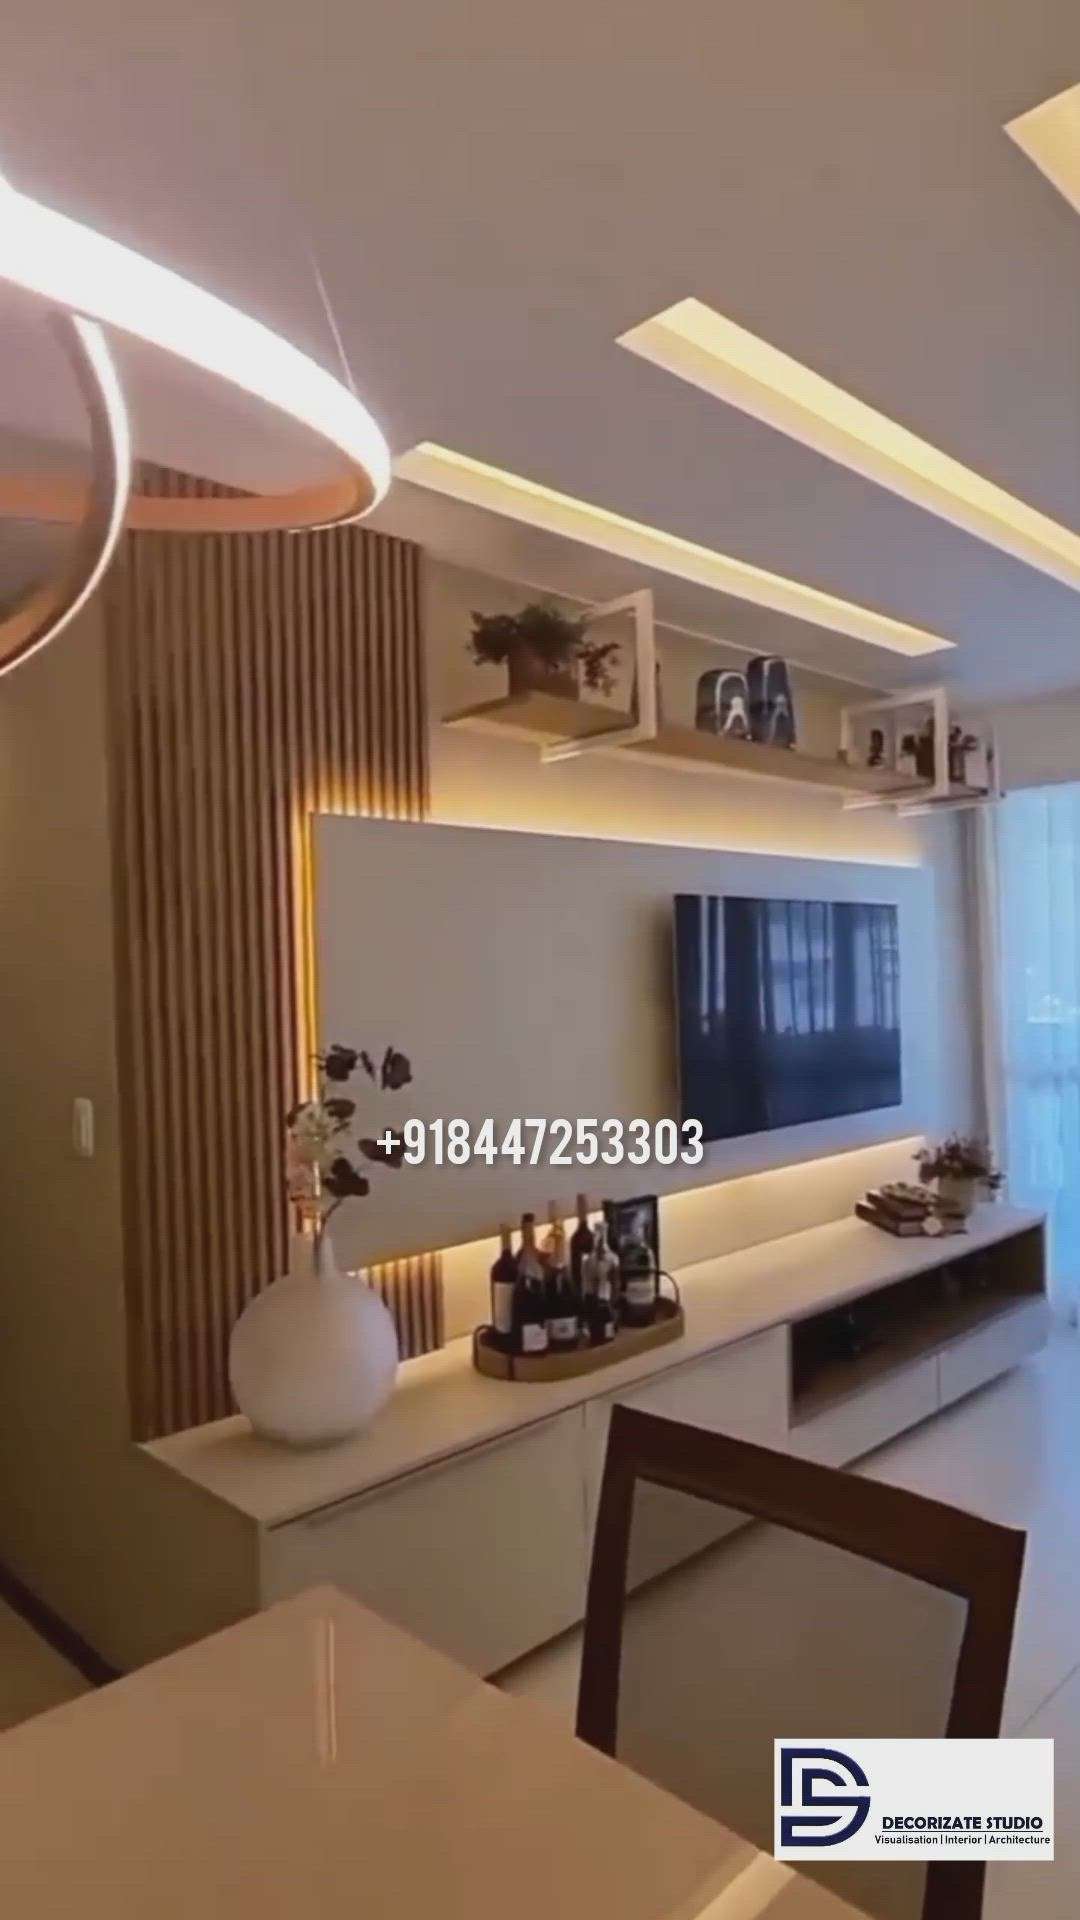 Contact Us for Your projects  We provide All services 
2D and 3D 
consultancy 
turnkey 
Contact Us -+918447253303 
for detail discussion of your project 
 #InteriorDesigner #LUXURY_INTERIOR #LivingRoomInspiration #realistic #LivingroomDesigns #LivingRoomTVCabinet #luxuryhomedecore #luxuryvillas